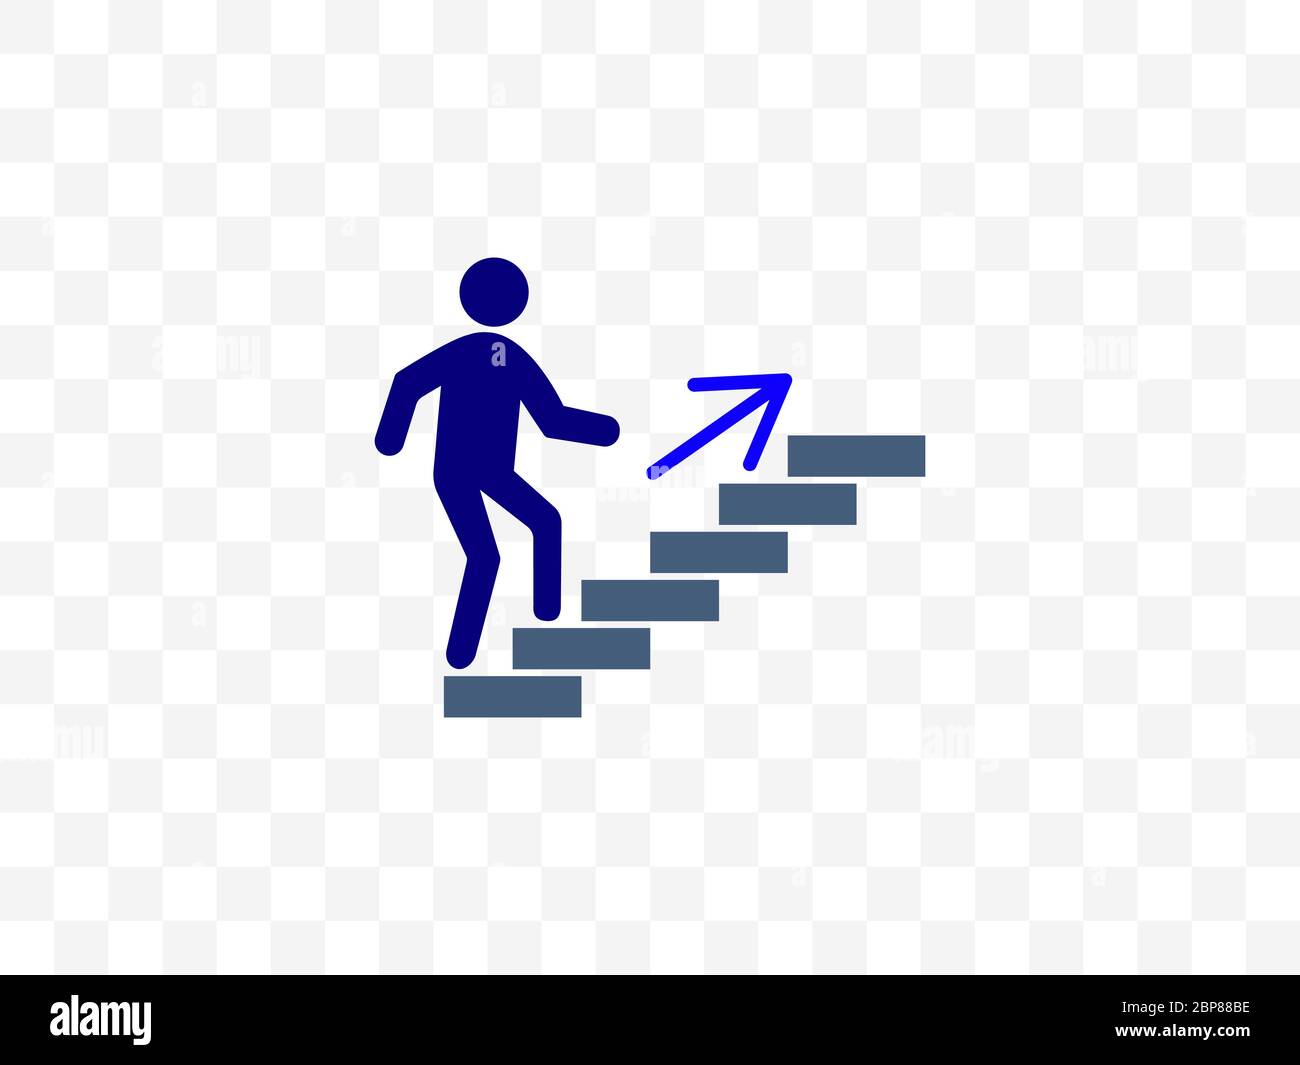 student climbing stairs clipart